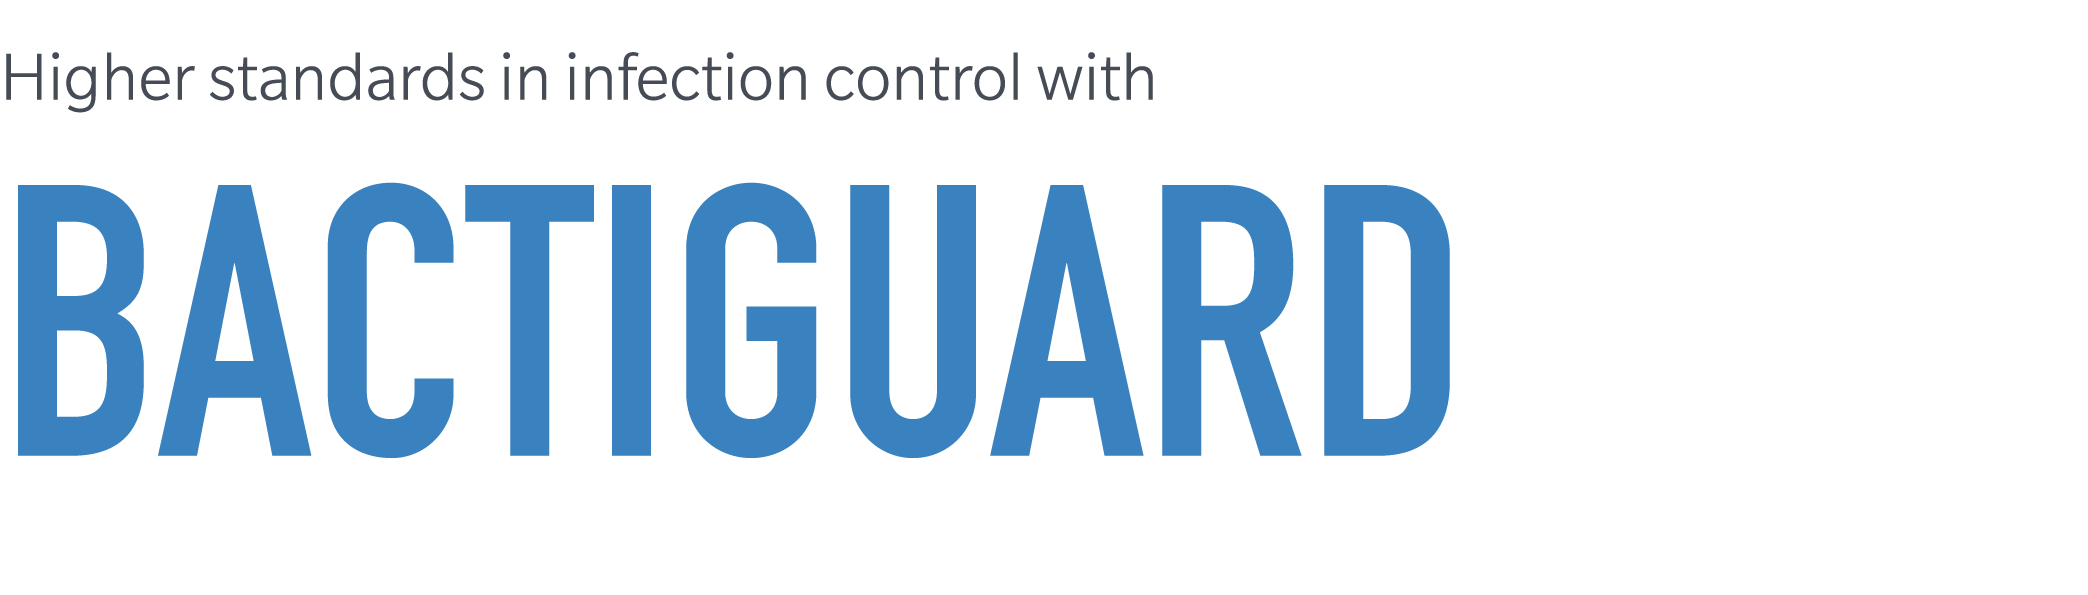 Higher standards in infection control with bactiguard